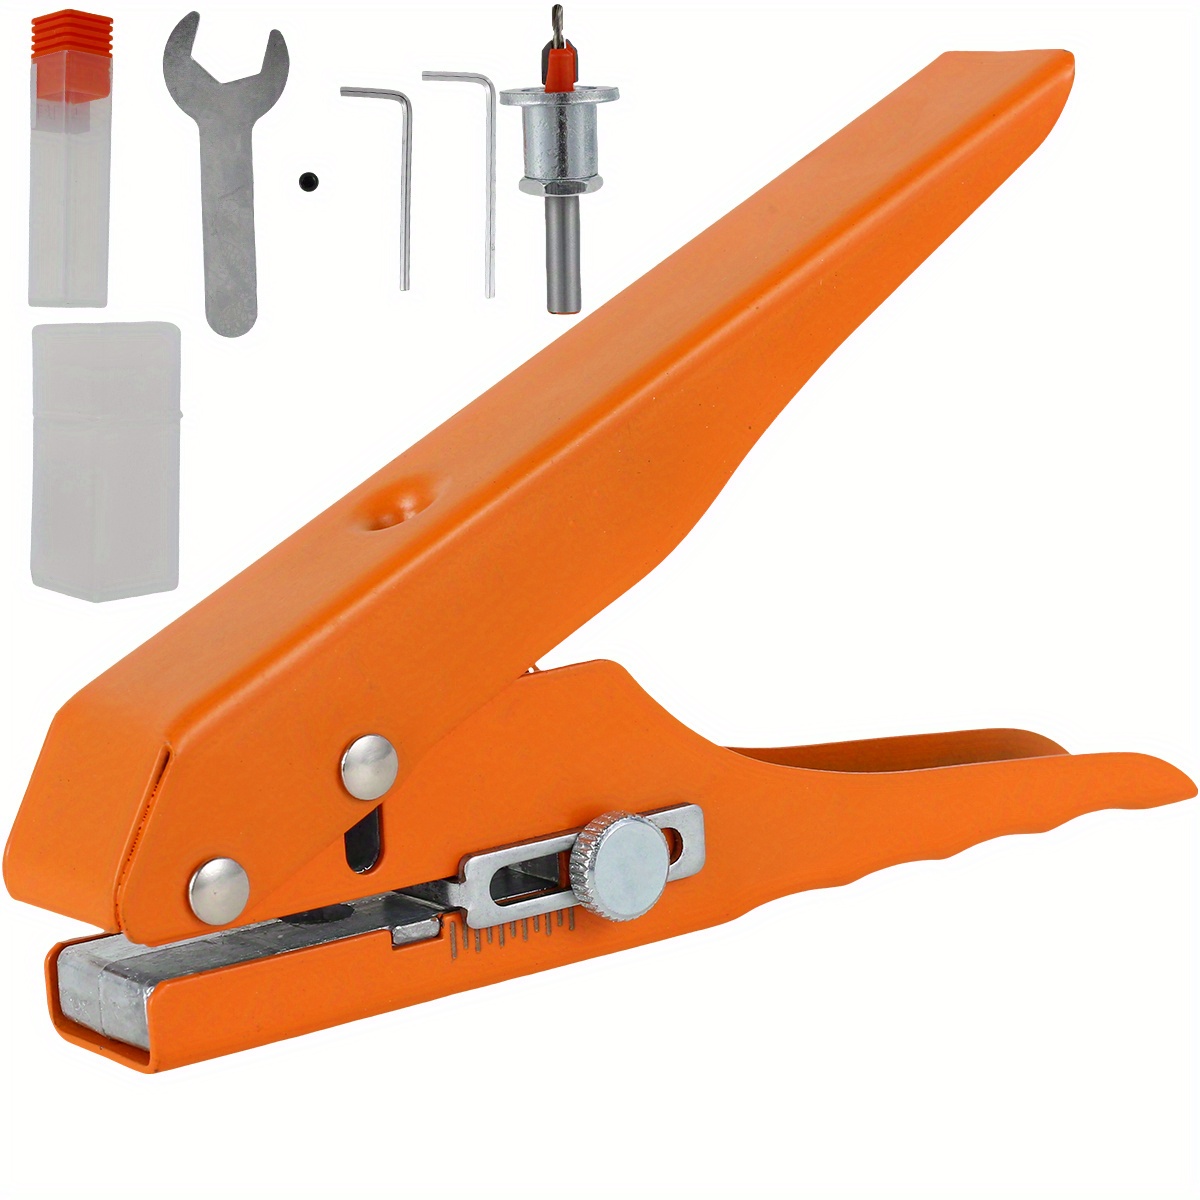 Hole Punch Mini Portable Hole Puncher For Office And - Temu